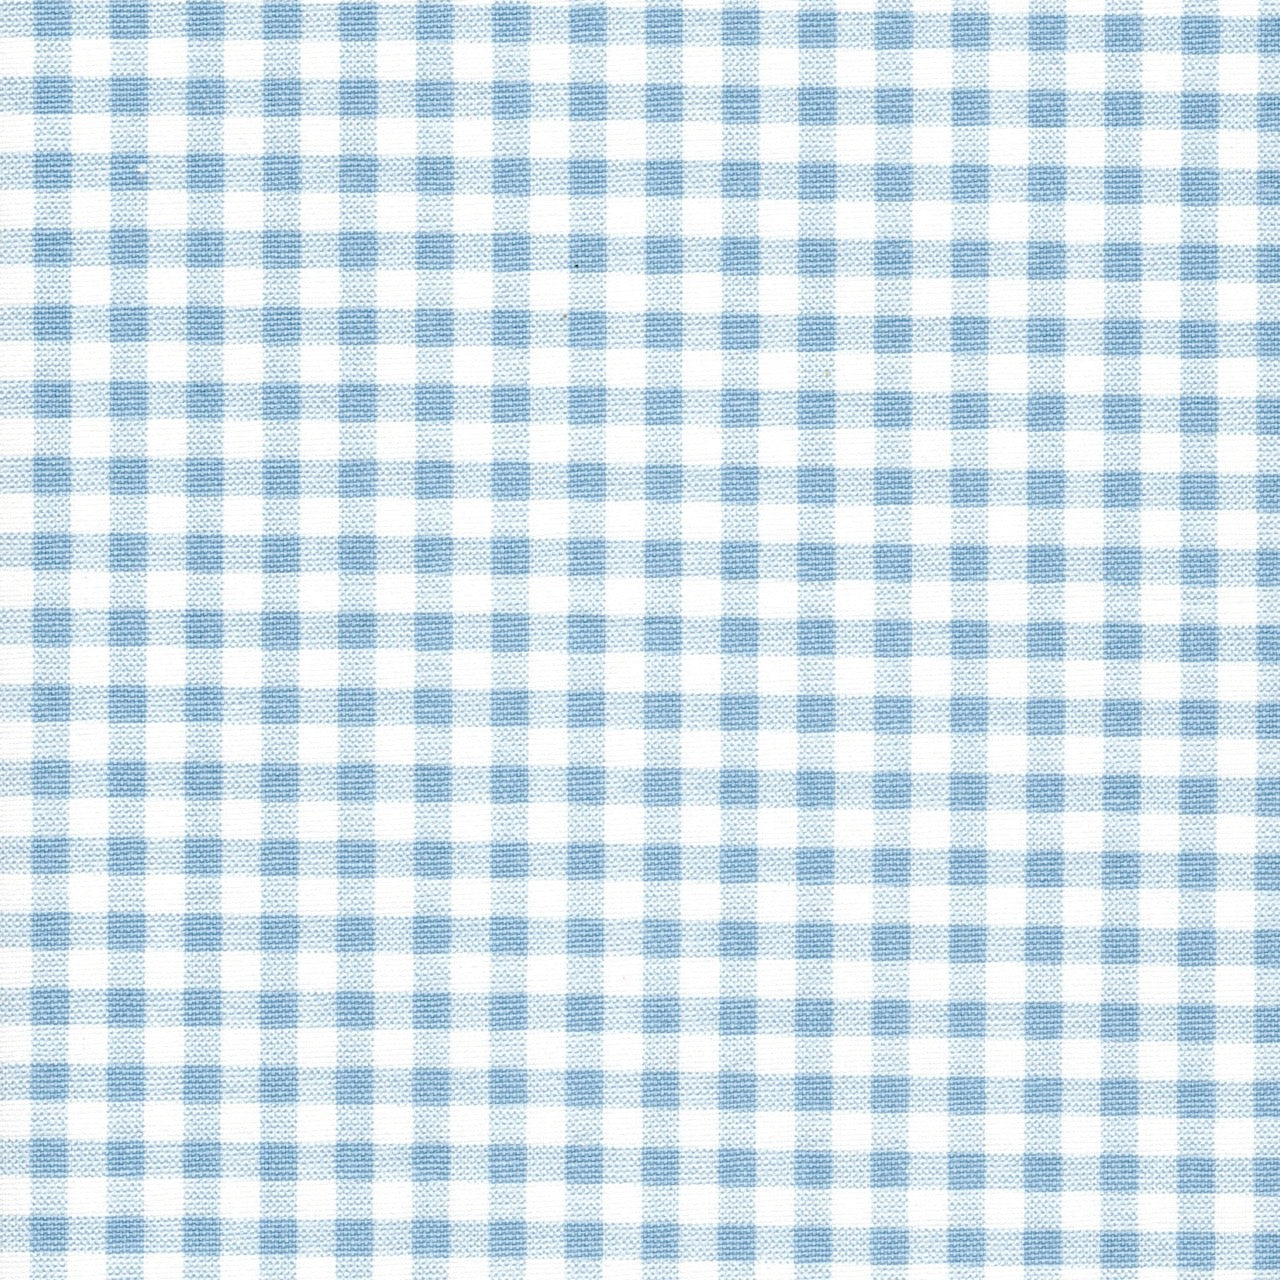 Pinch Pleated Curtains in Weathered Blue Large Gingham Check on White